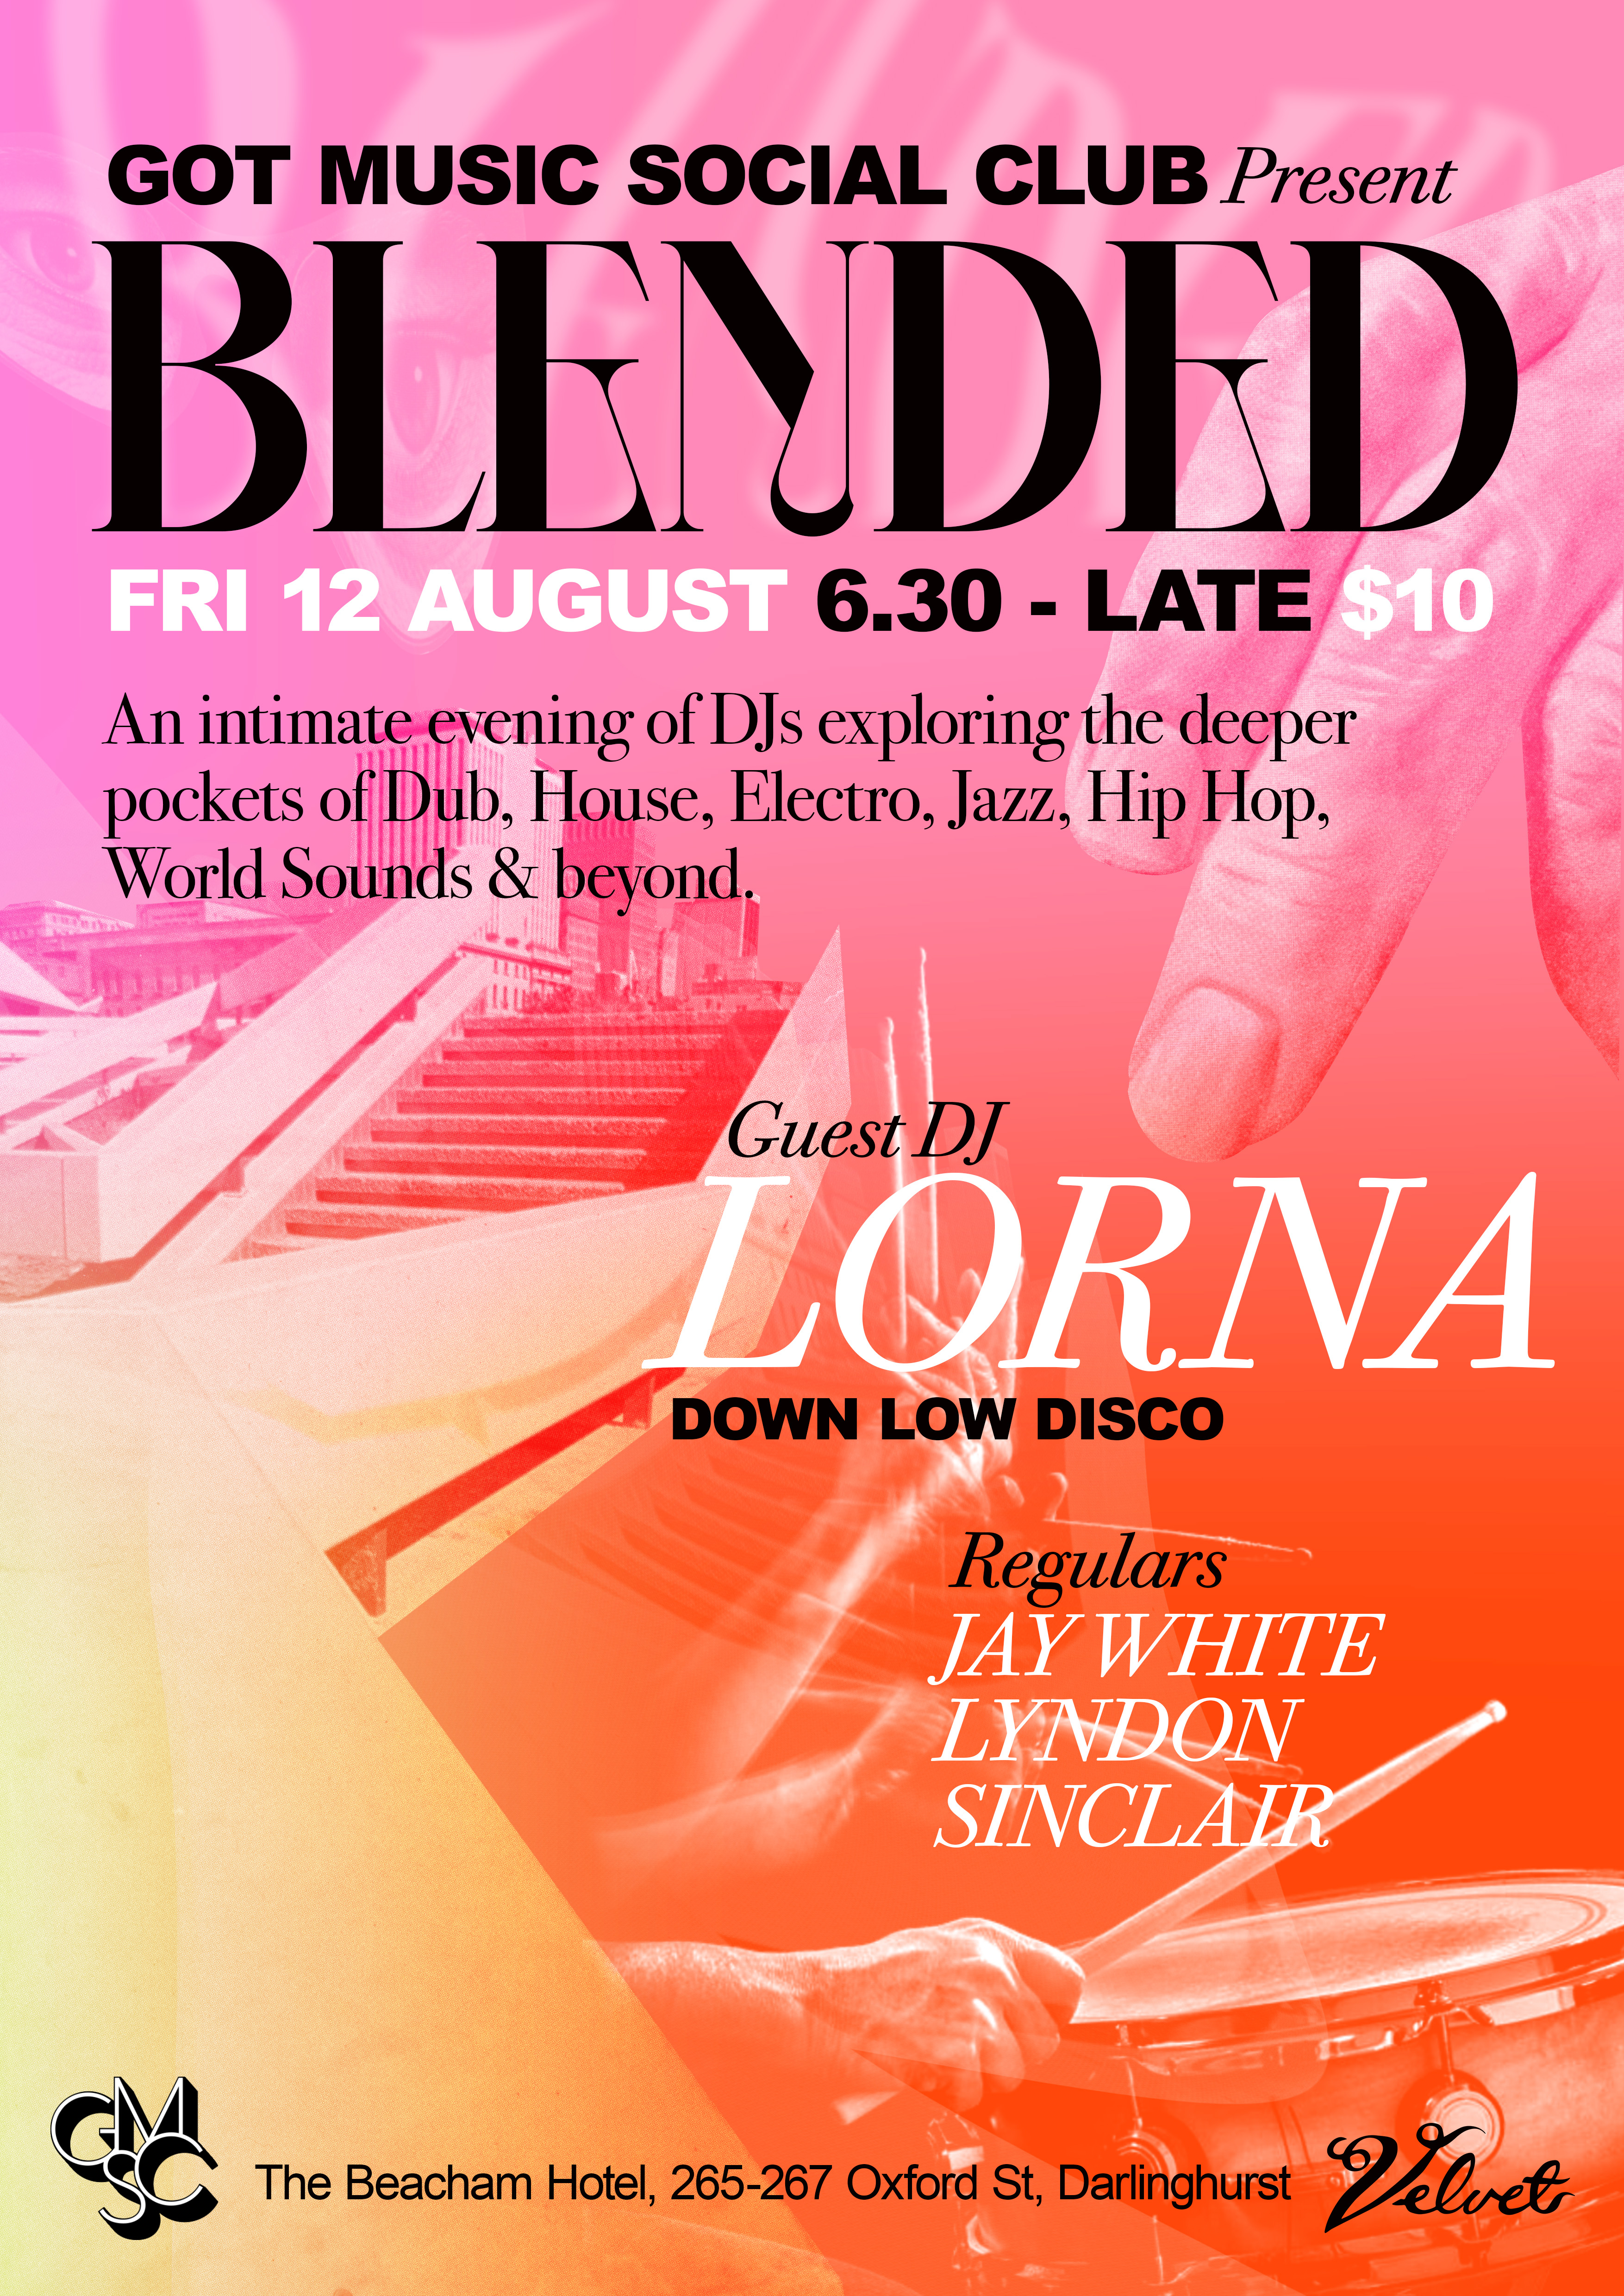 Got Music Social Club presents BLENDED with DJ Lorna - Flyer front